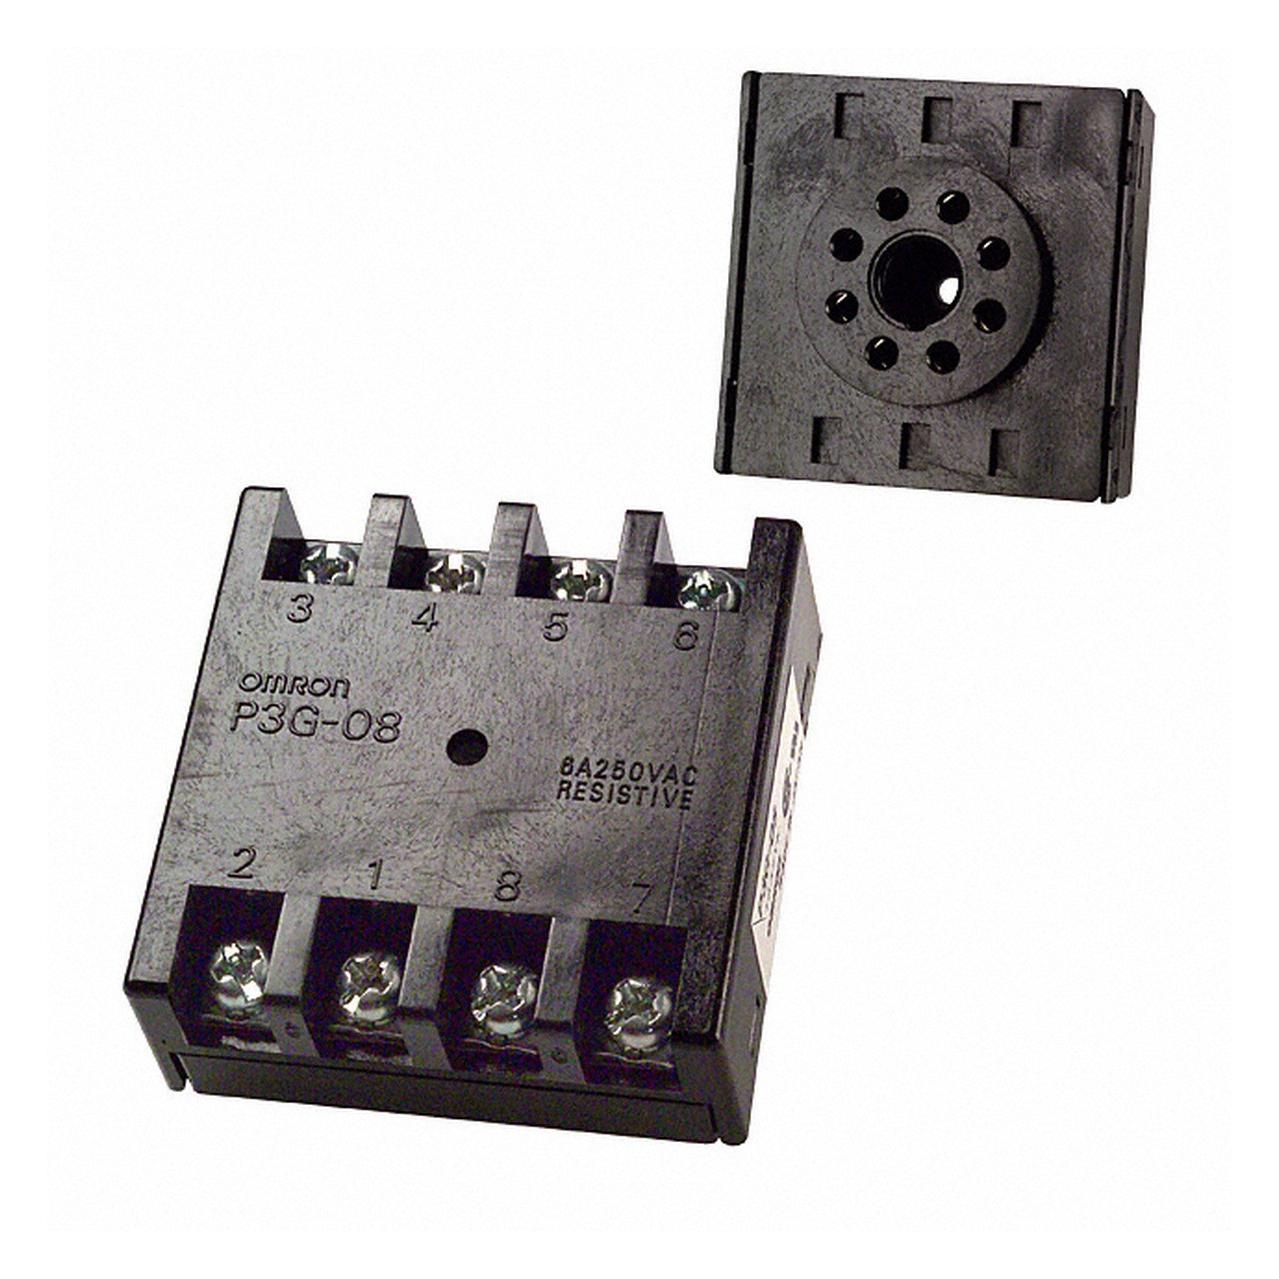 P3G-08 RELAY SOCKETS RELAYS ACCESSORIES OMRON